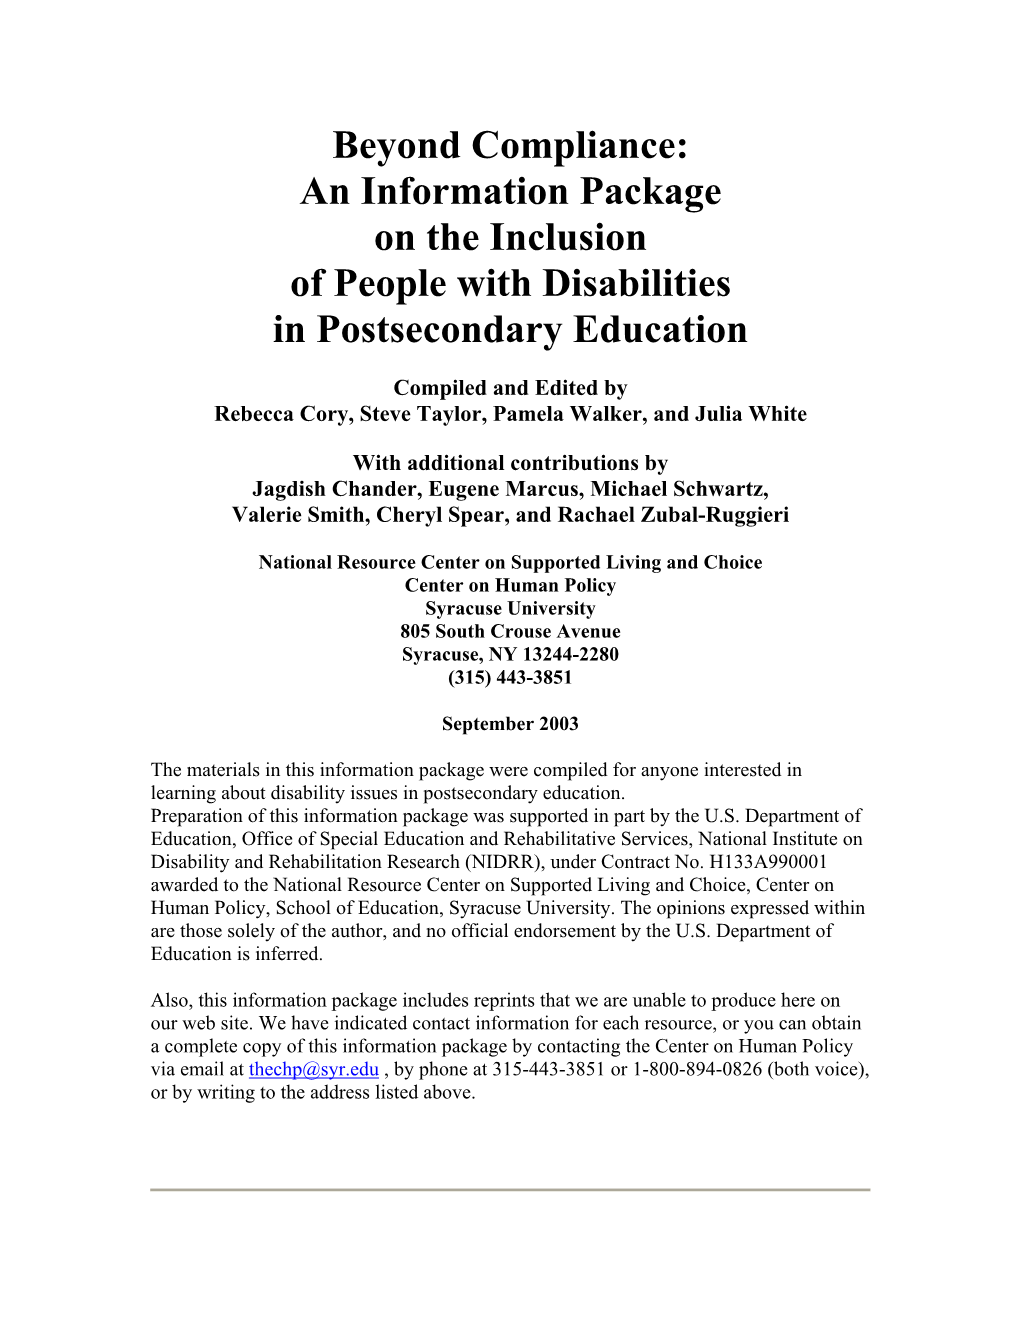 Beyond Compliance: an Information Package on the Inclusion of People with Disabilities in Postsecondary Education